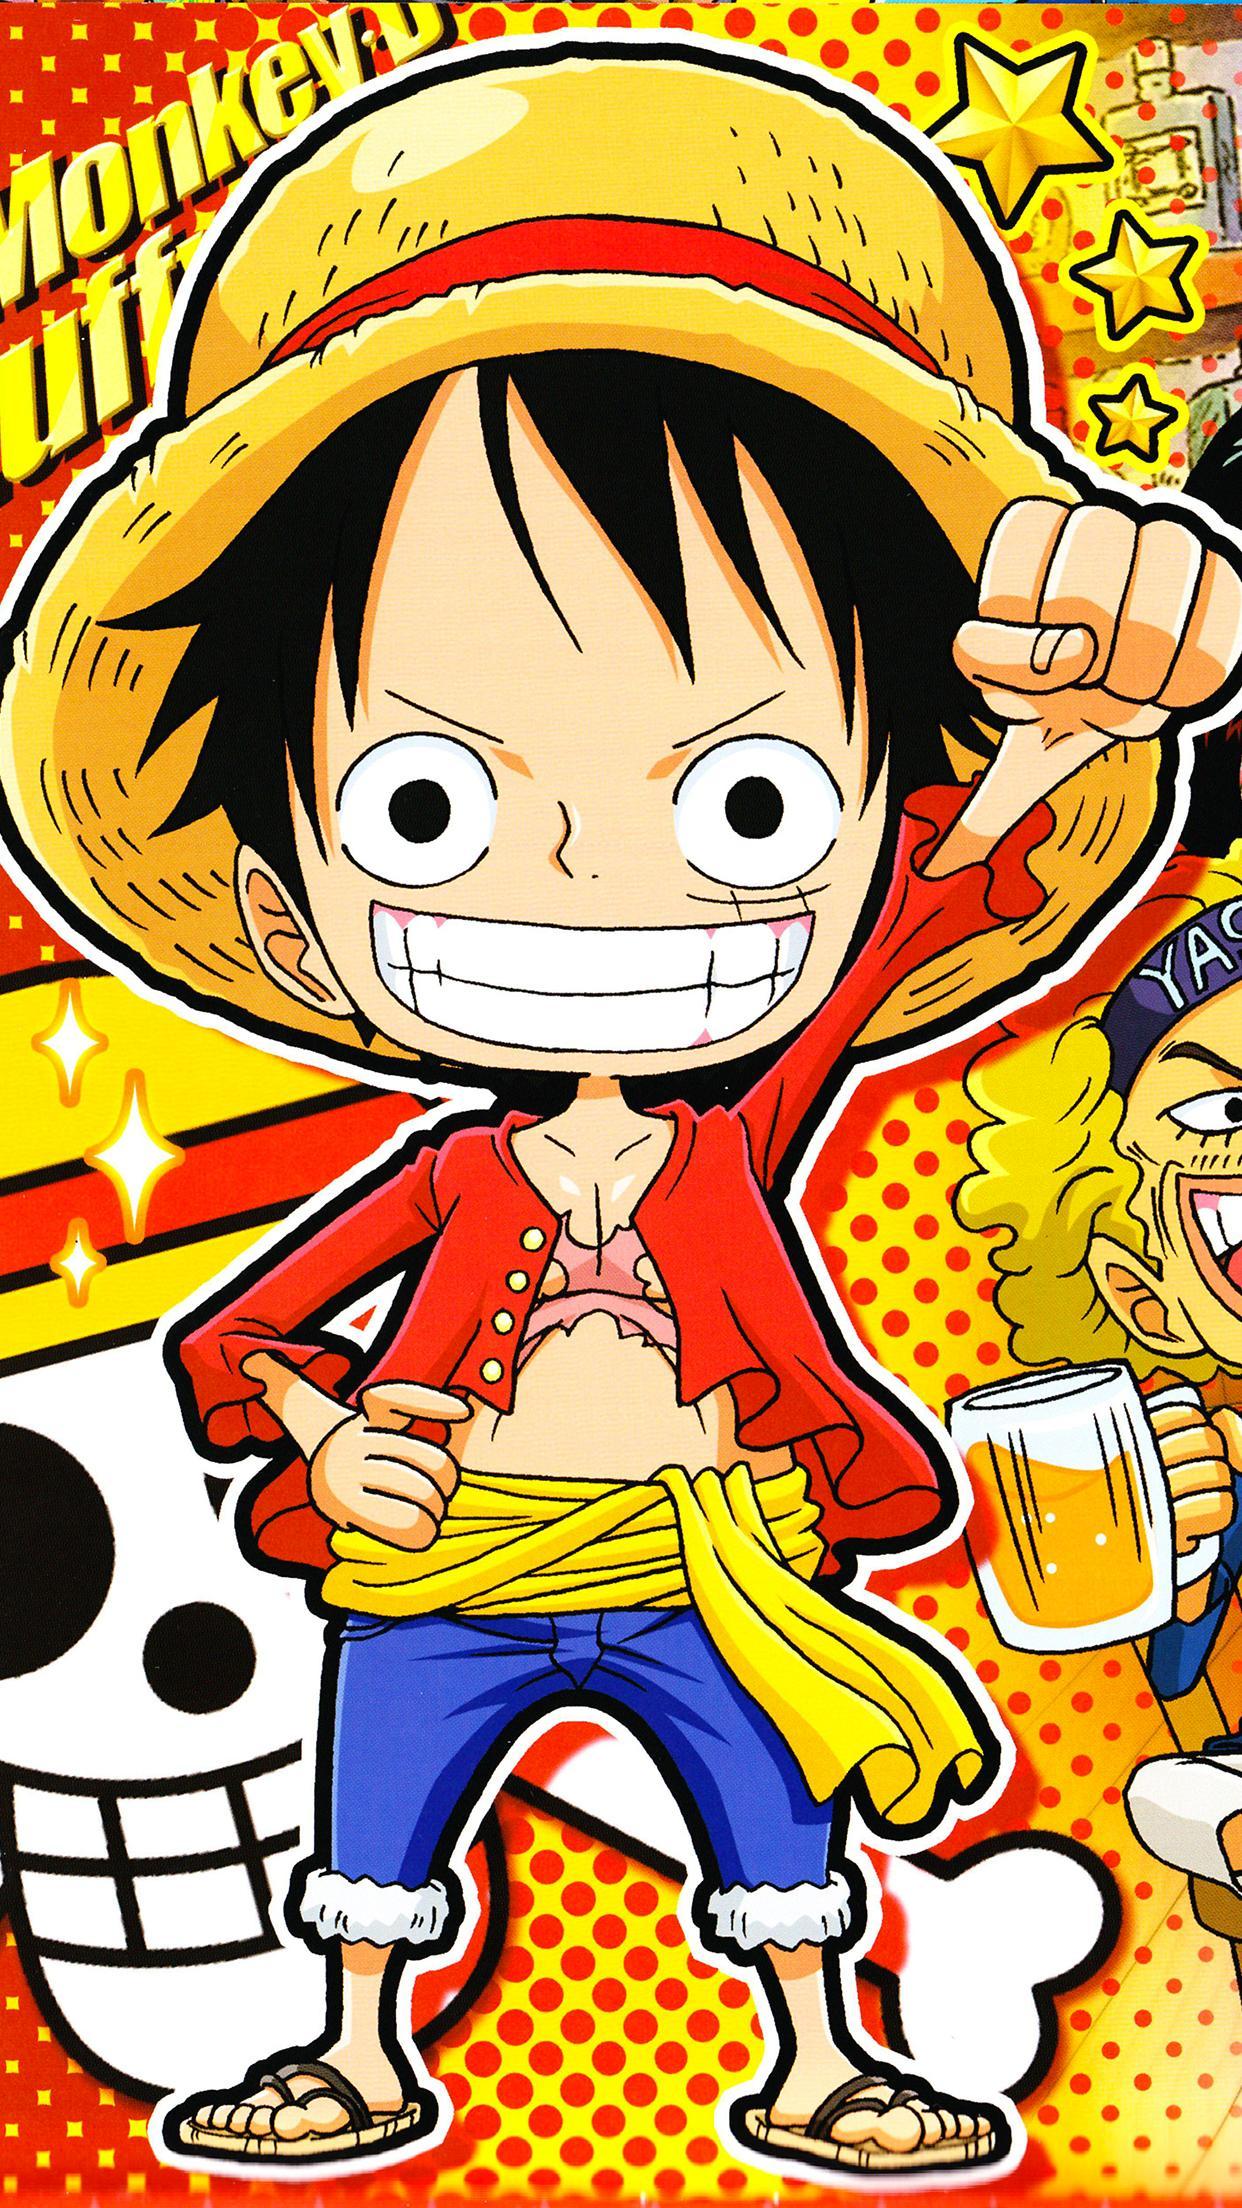 One Piece Mini Wallpaper for iPhone Pro Max, X, 6